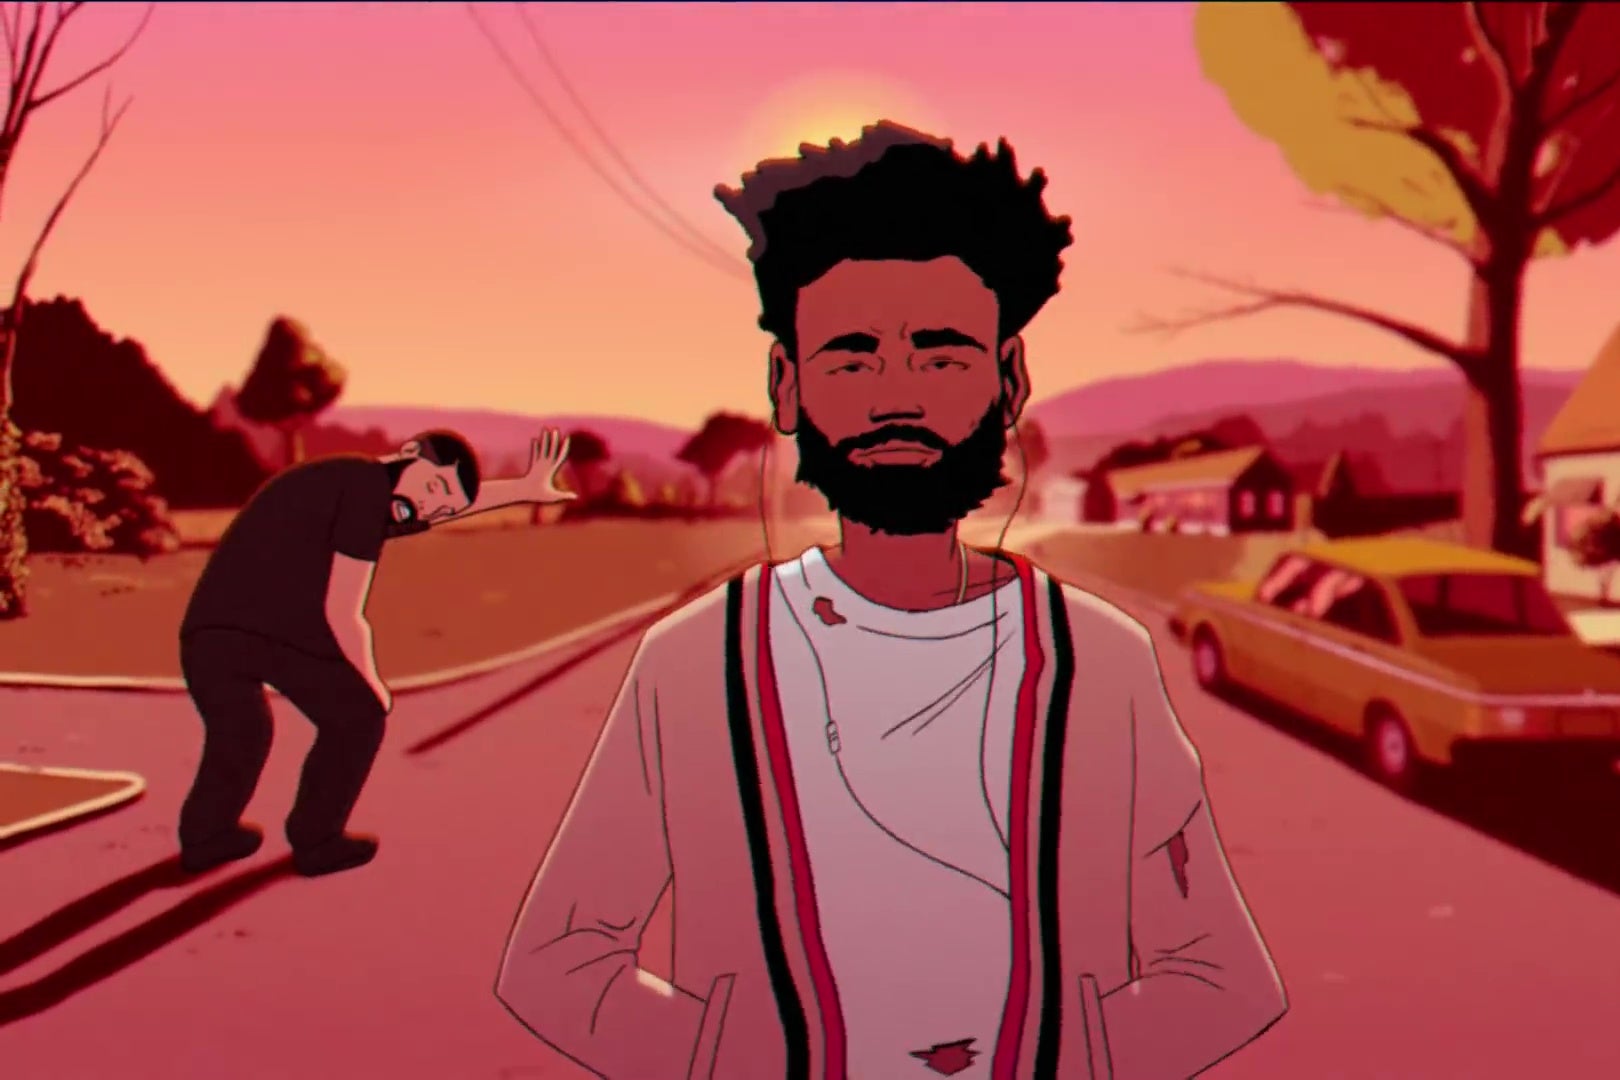 An animated version of Drake, bent over and out of breath.